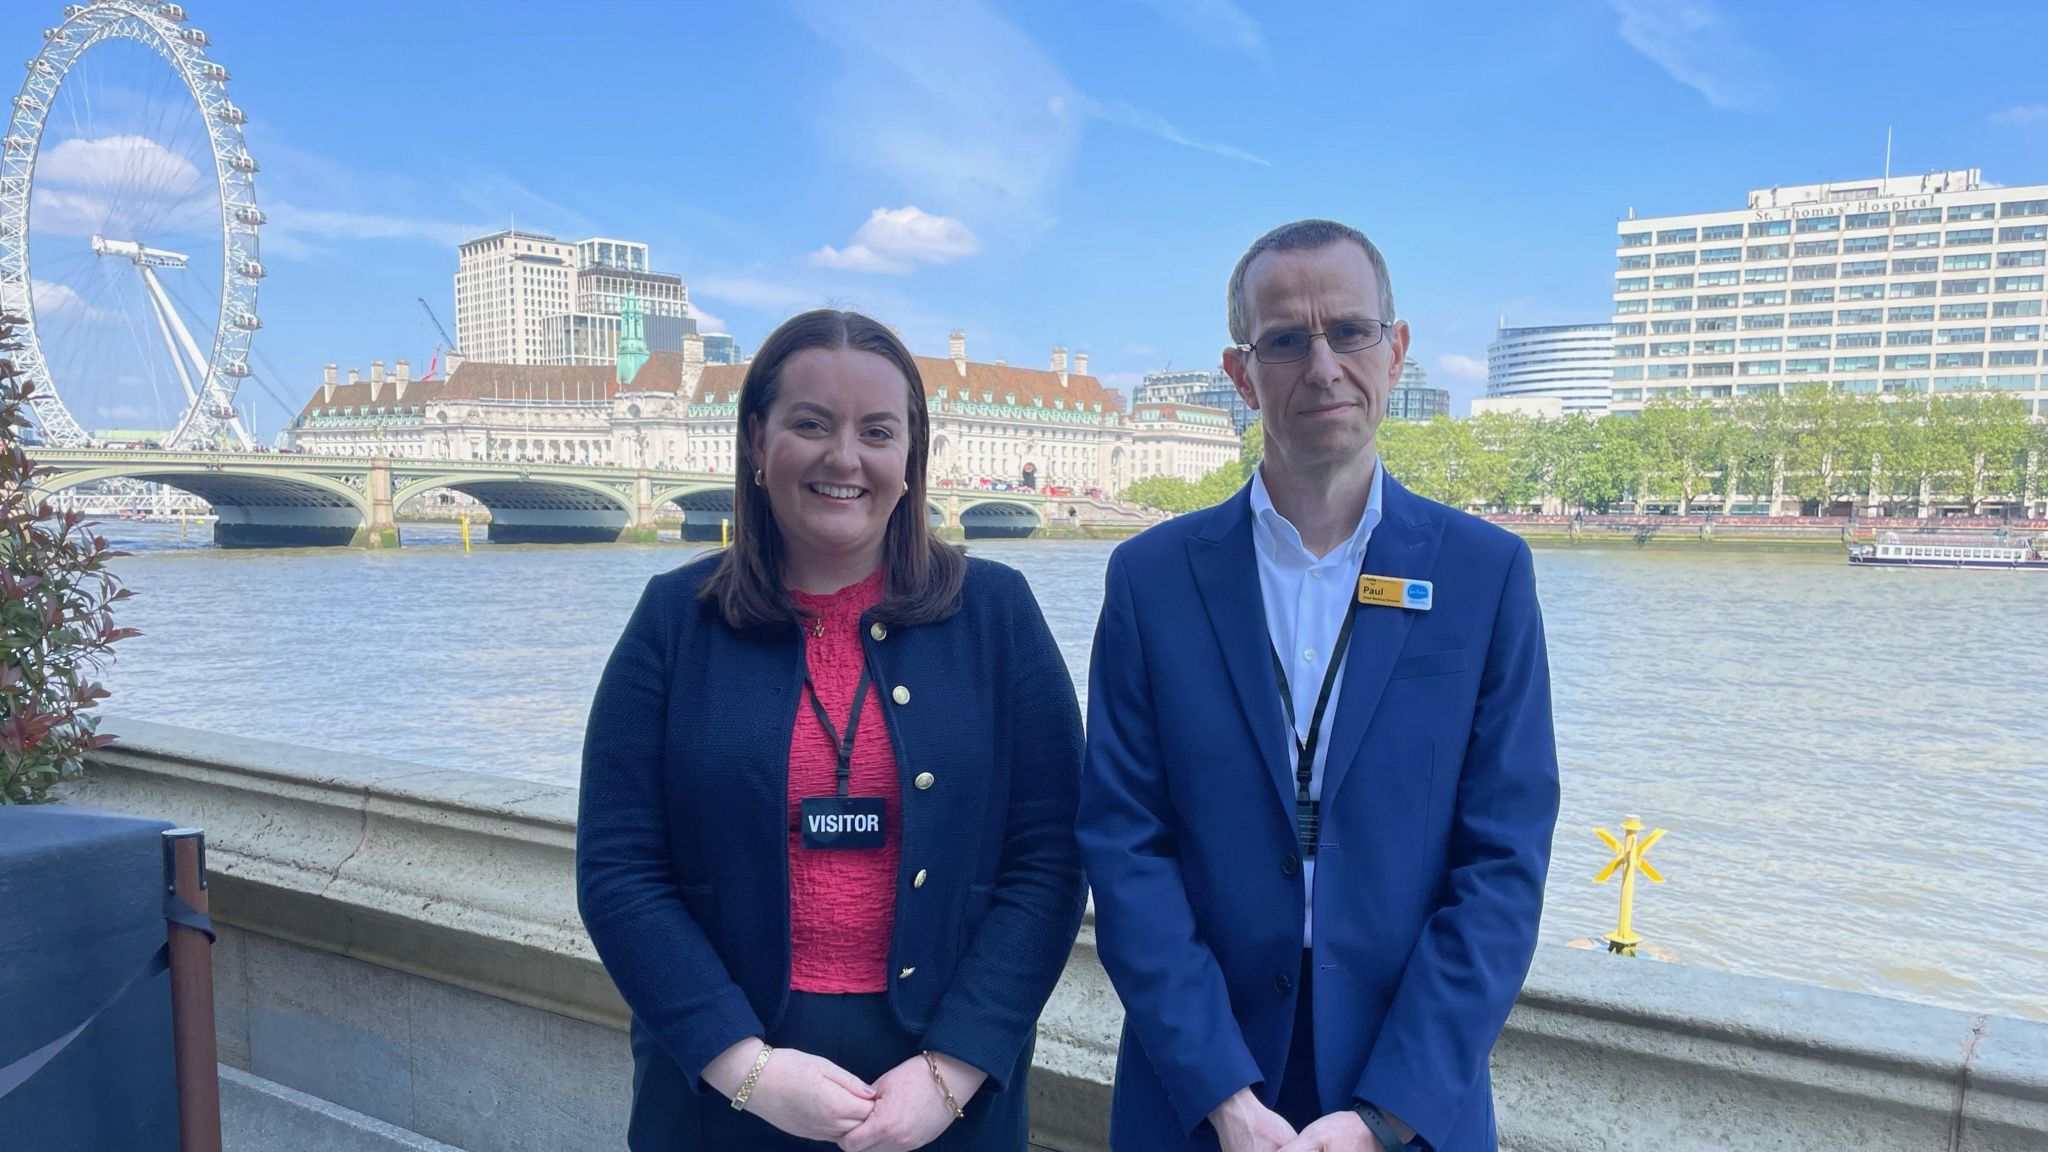 Naomi Barlow, standing in a dark blue suit and pink shirt, with Dr Paul Perkins - wearing a dark blue suit - stood next to her in front of the River Thames in front of the Houses of Parliament